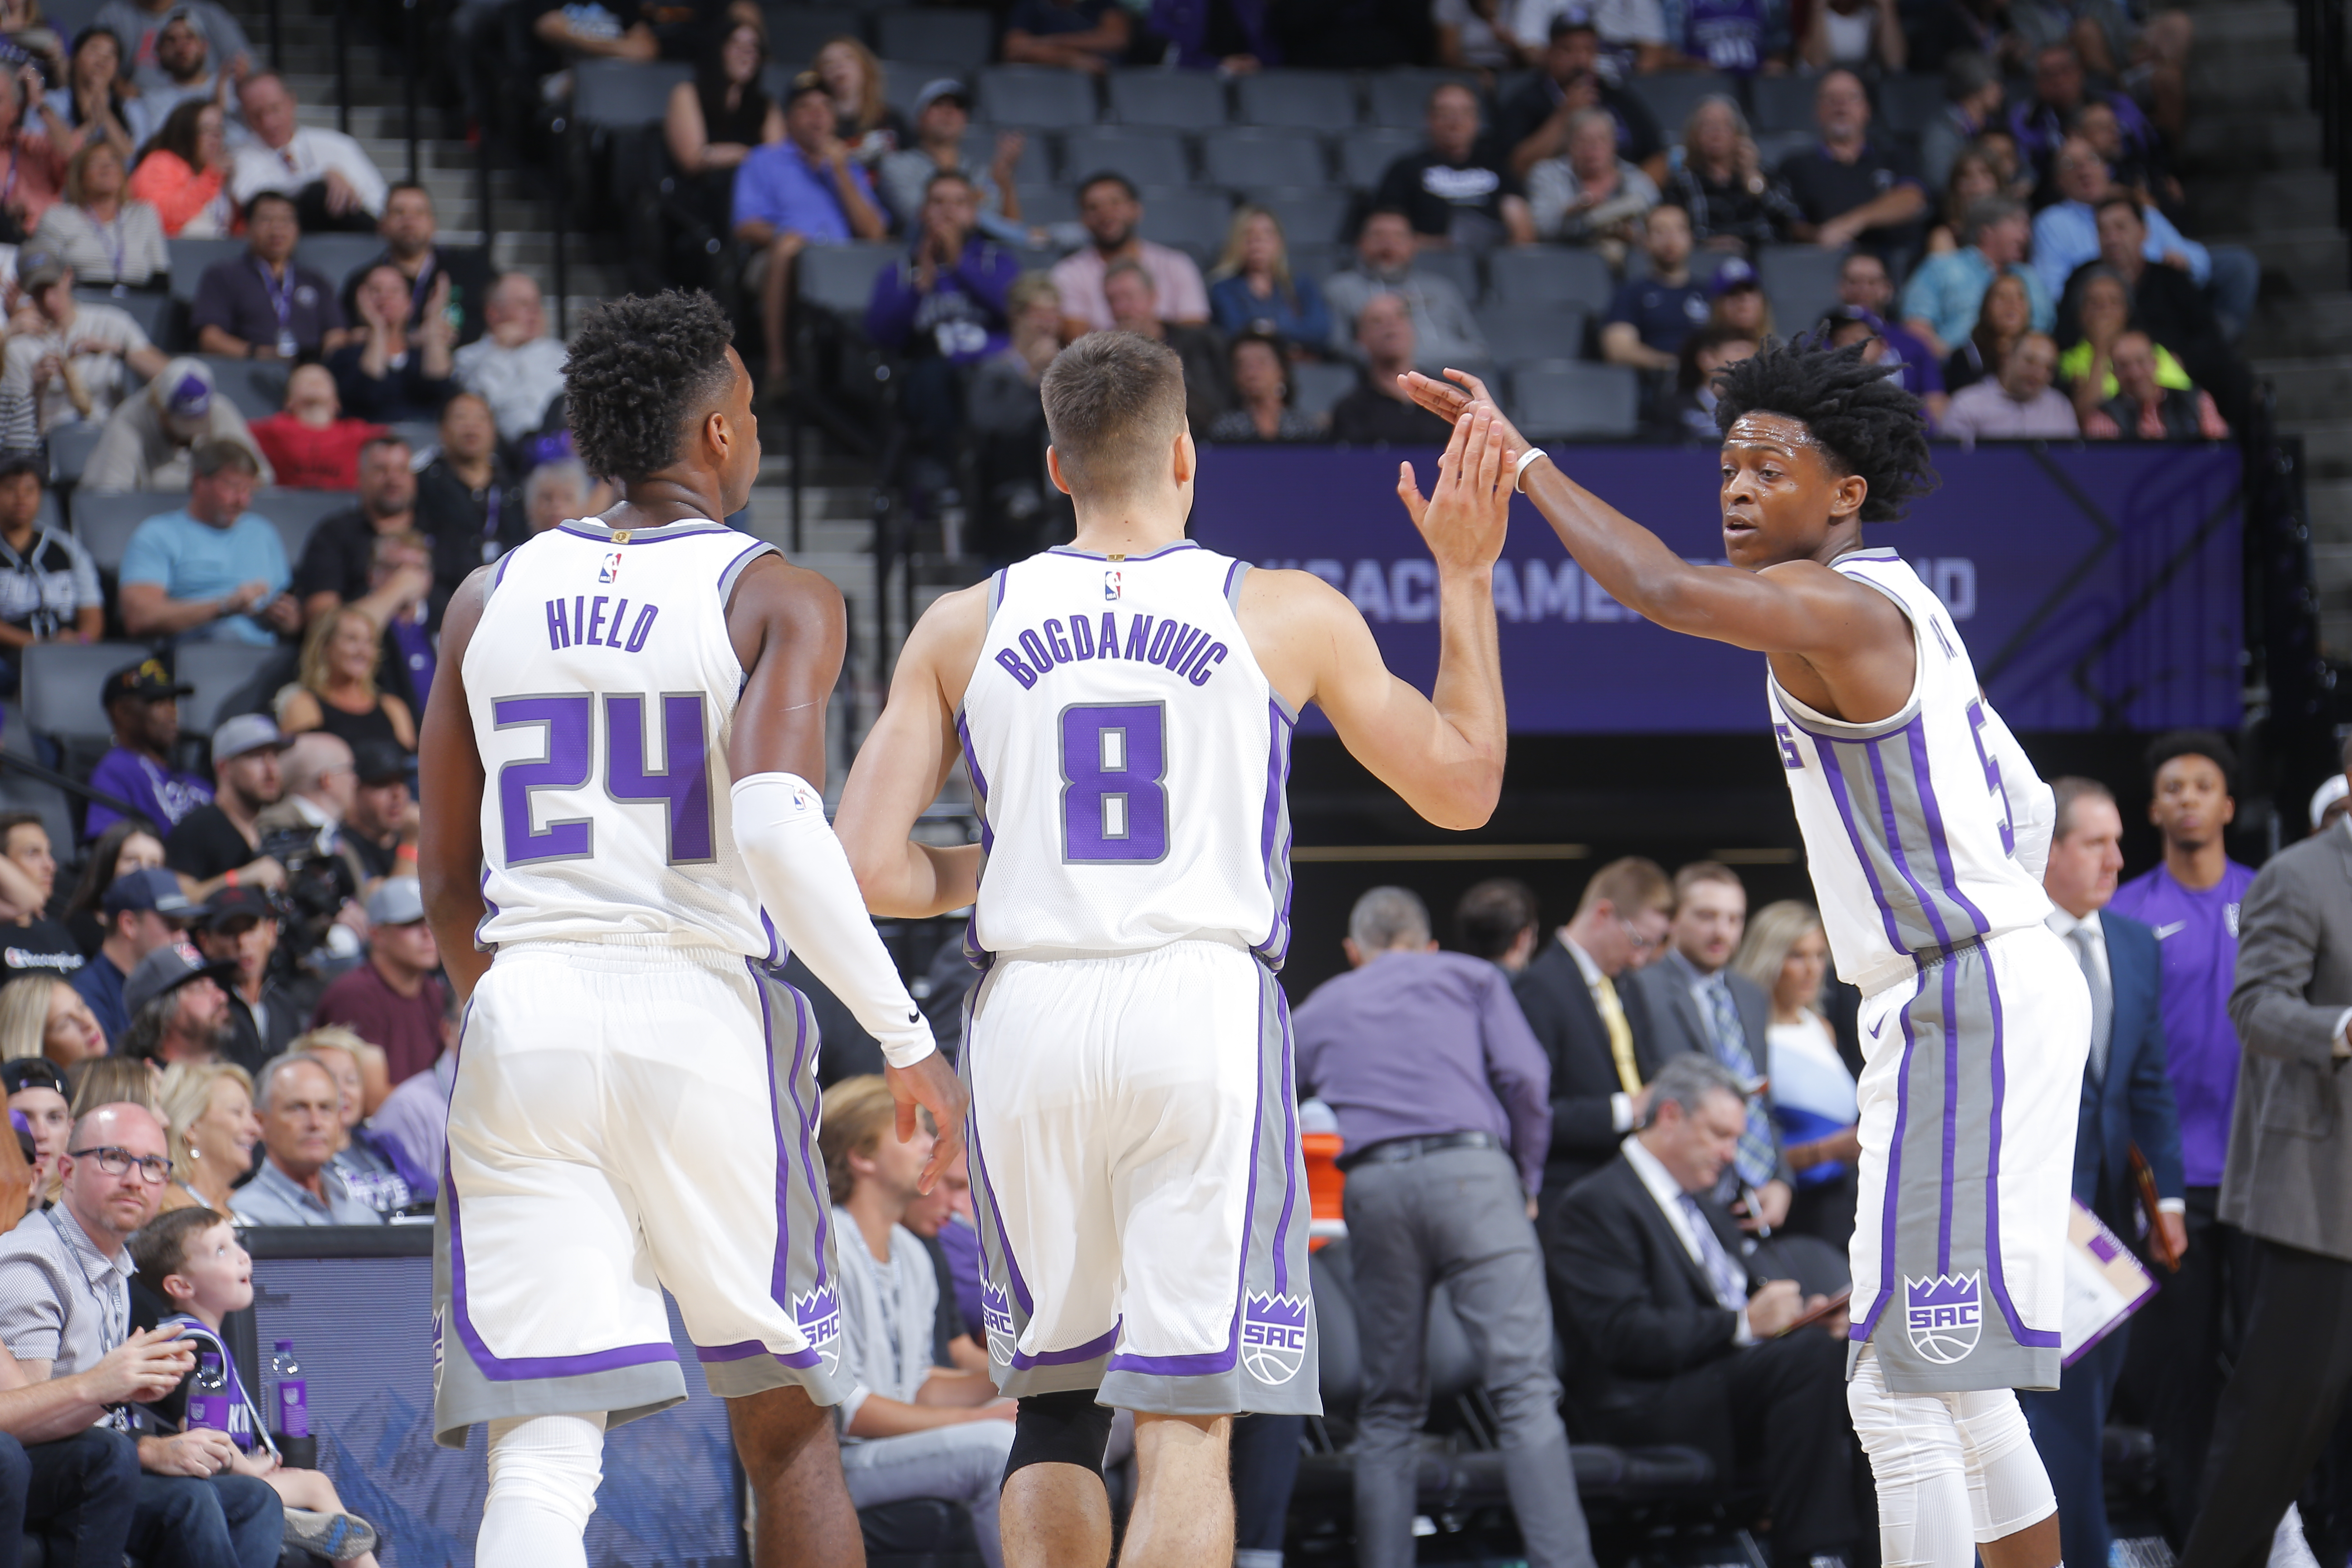 SACRAMENTO, CA - OCTOBER 2: De'Aaron Fox #5 of the Sacramento Kings give high fives to teammates during the preseason game against the San Antonio Spurs on October 2, 2017 at Golden 1 Center in Sacramento, California. NOTE TO USER: User expressly acknowledges and agrees that, by downloading and or using this Photograph, user is consenting to the terms and conditions of the Getty Images License Agreement. Mandatory Copyright Notice: Copyright 2017 NBAE